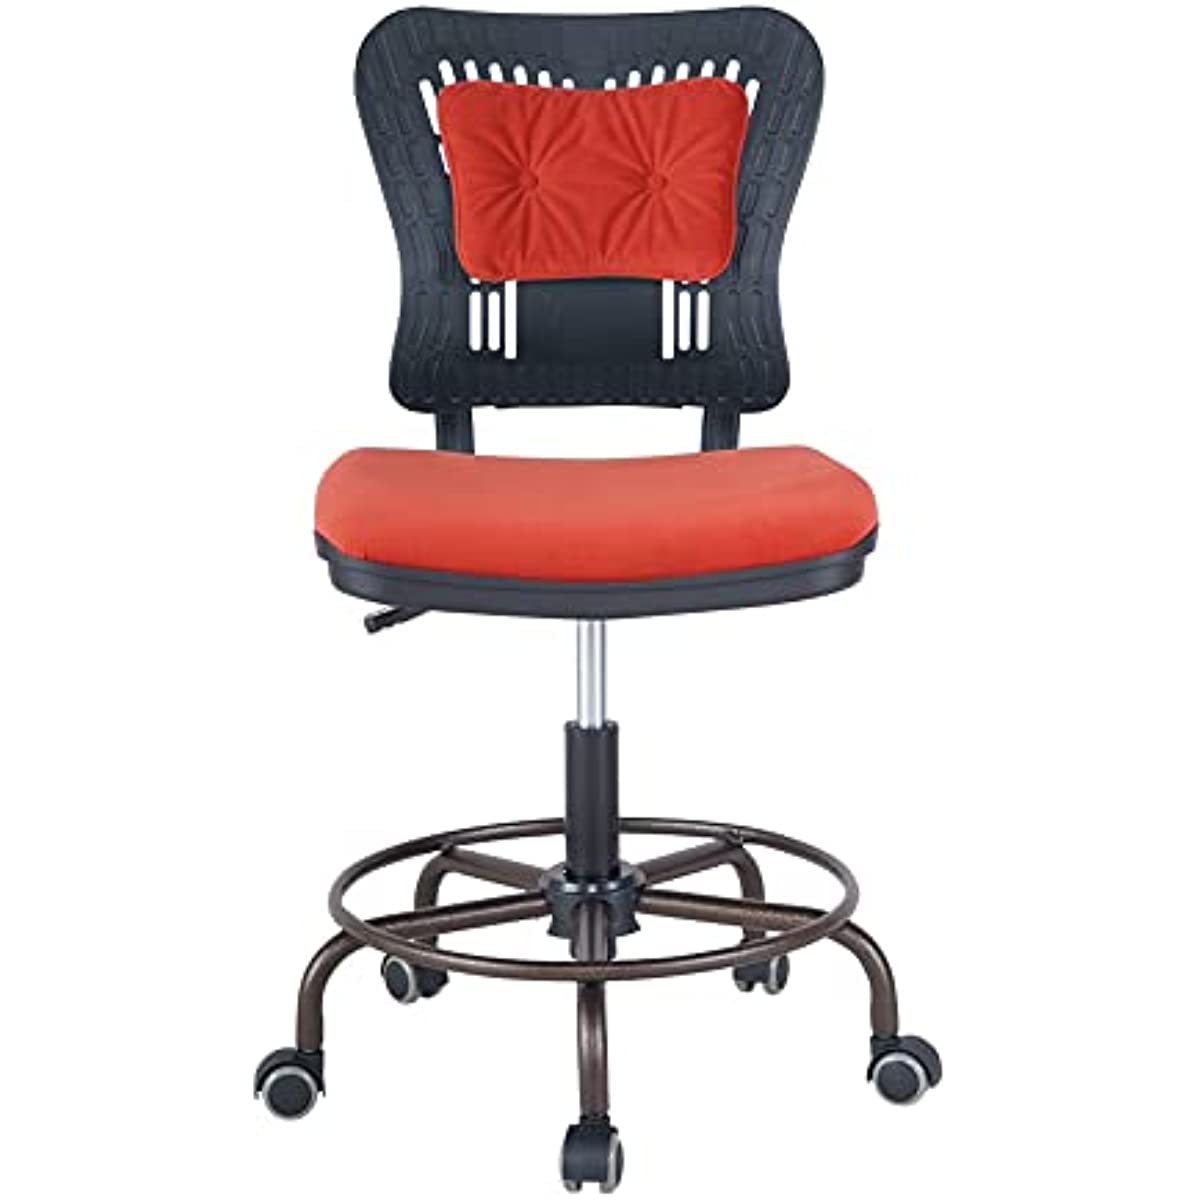 Ergonomic Office Chair Low Back Adjustable Seat Height 360° Task Chair, Rolling Chair with 5 Rolling Castors, Upholstered Armless Executive Comfy Task Chair Without arms (Red)